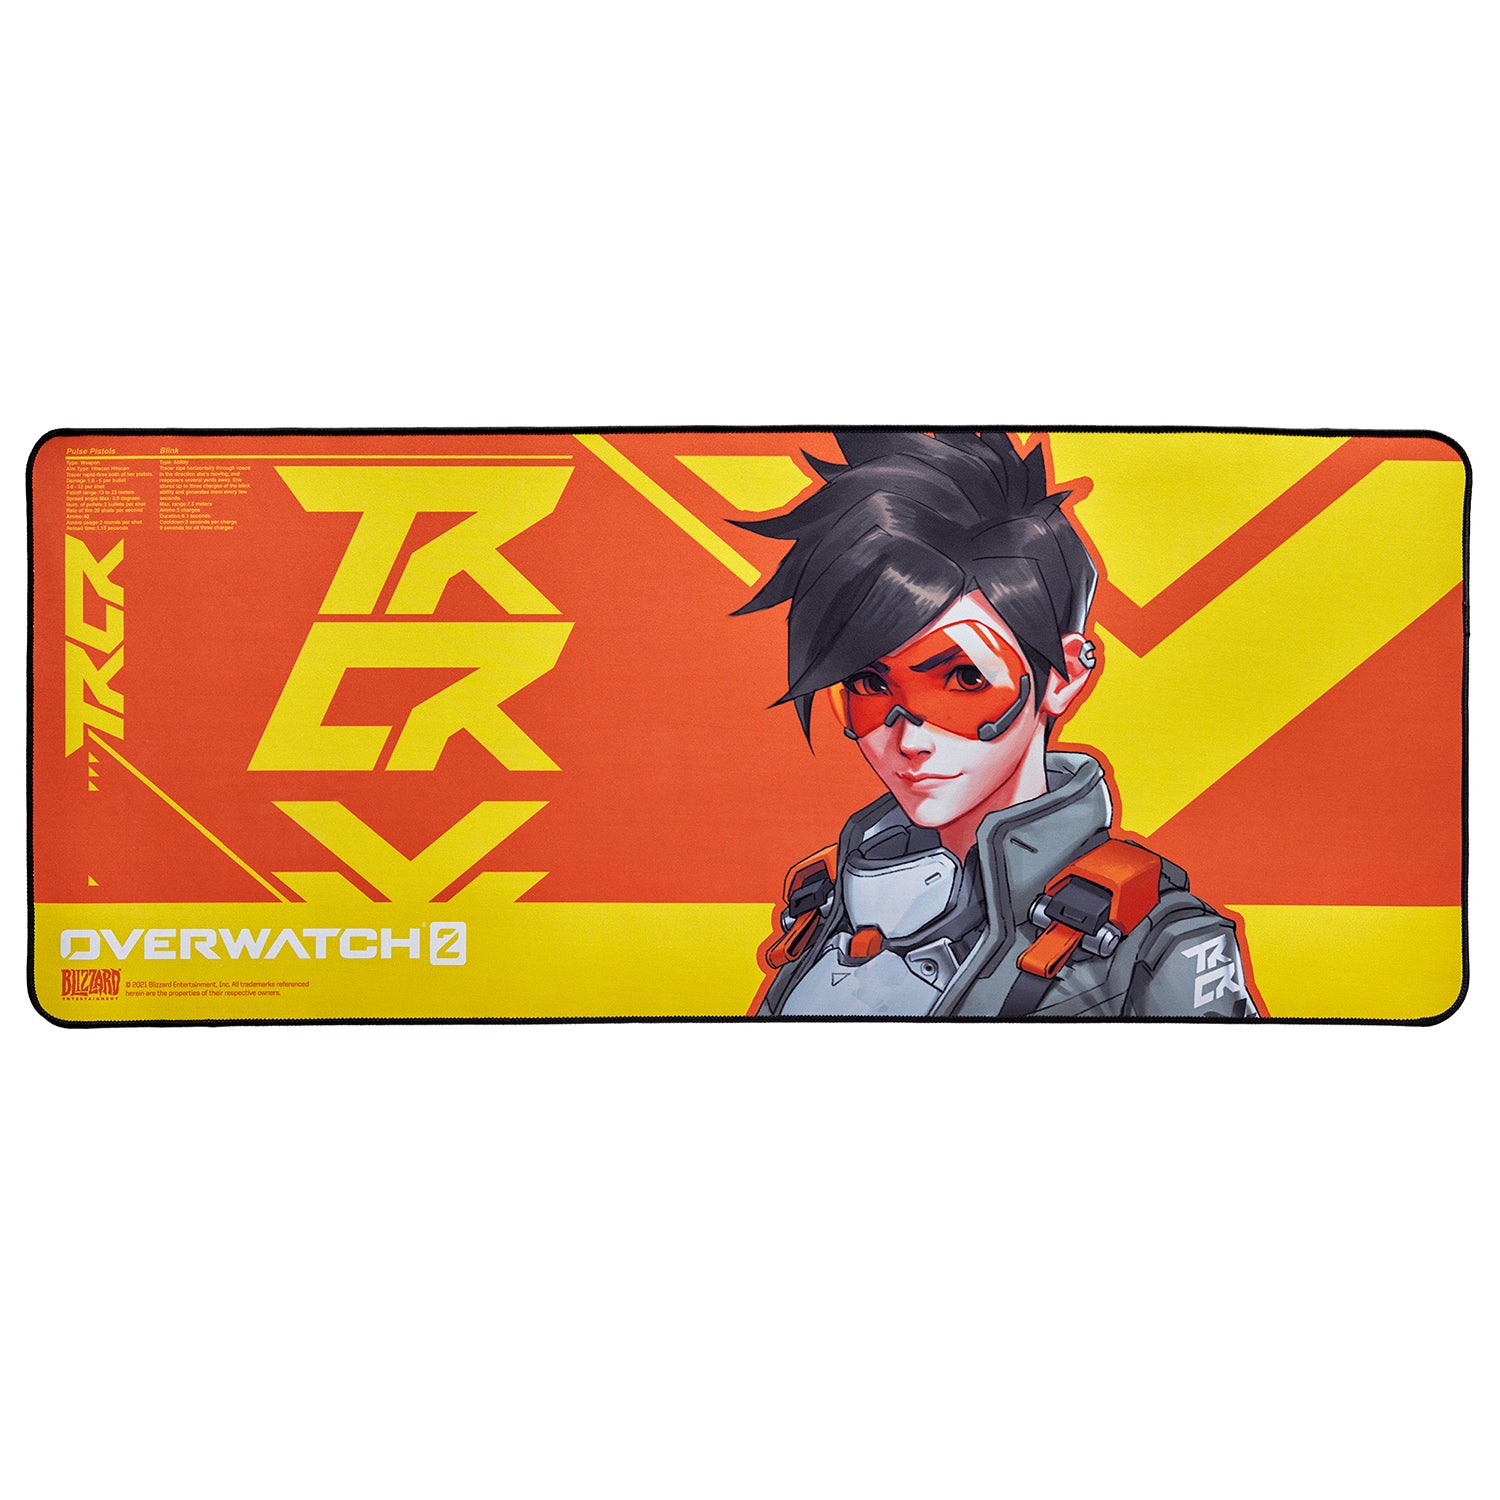 Overwatch 2 Tracer Gaming Desk Mat in Yellow - Front View